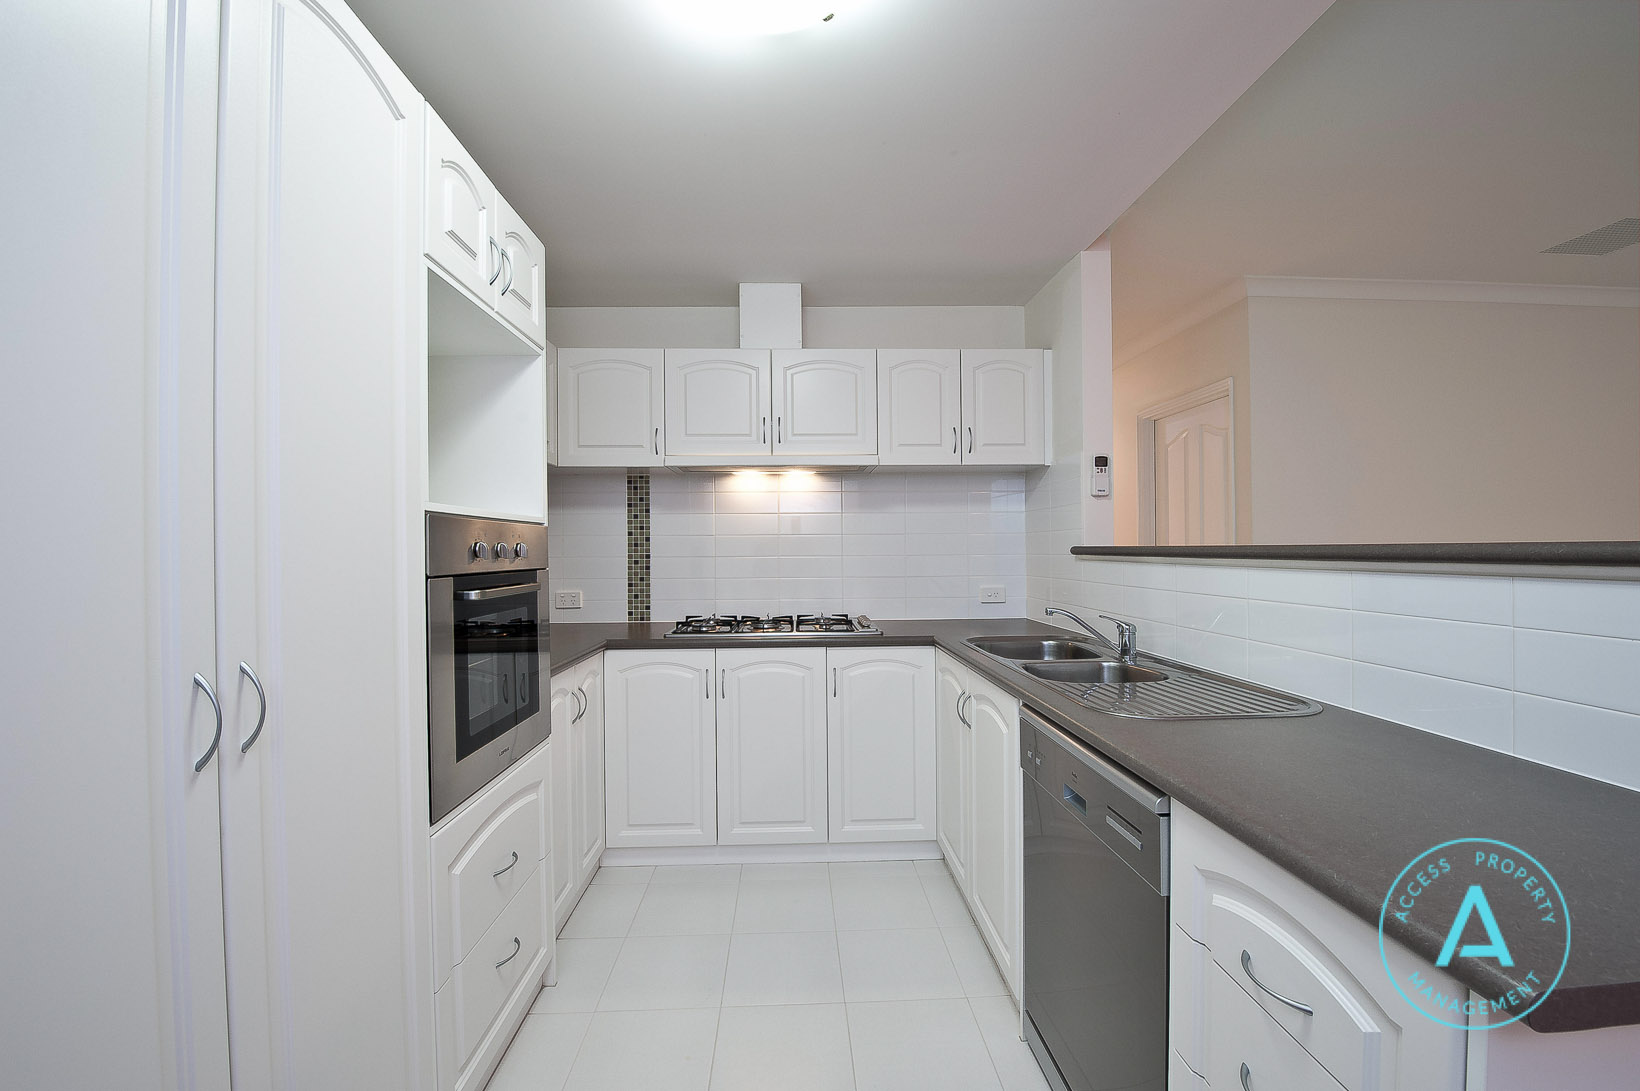 Access Property Management 7/8 Forster Avenue Kitchen